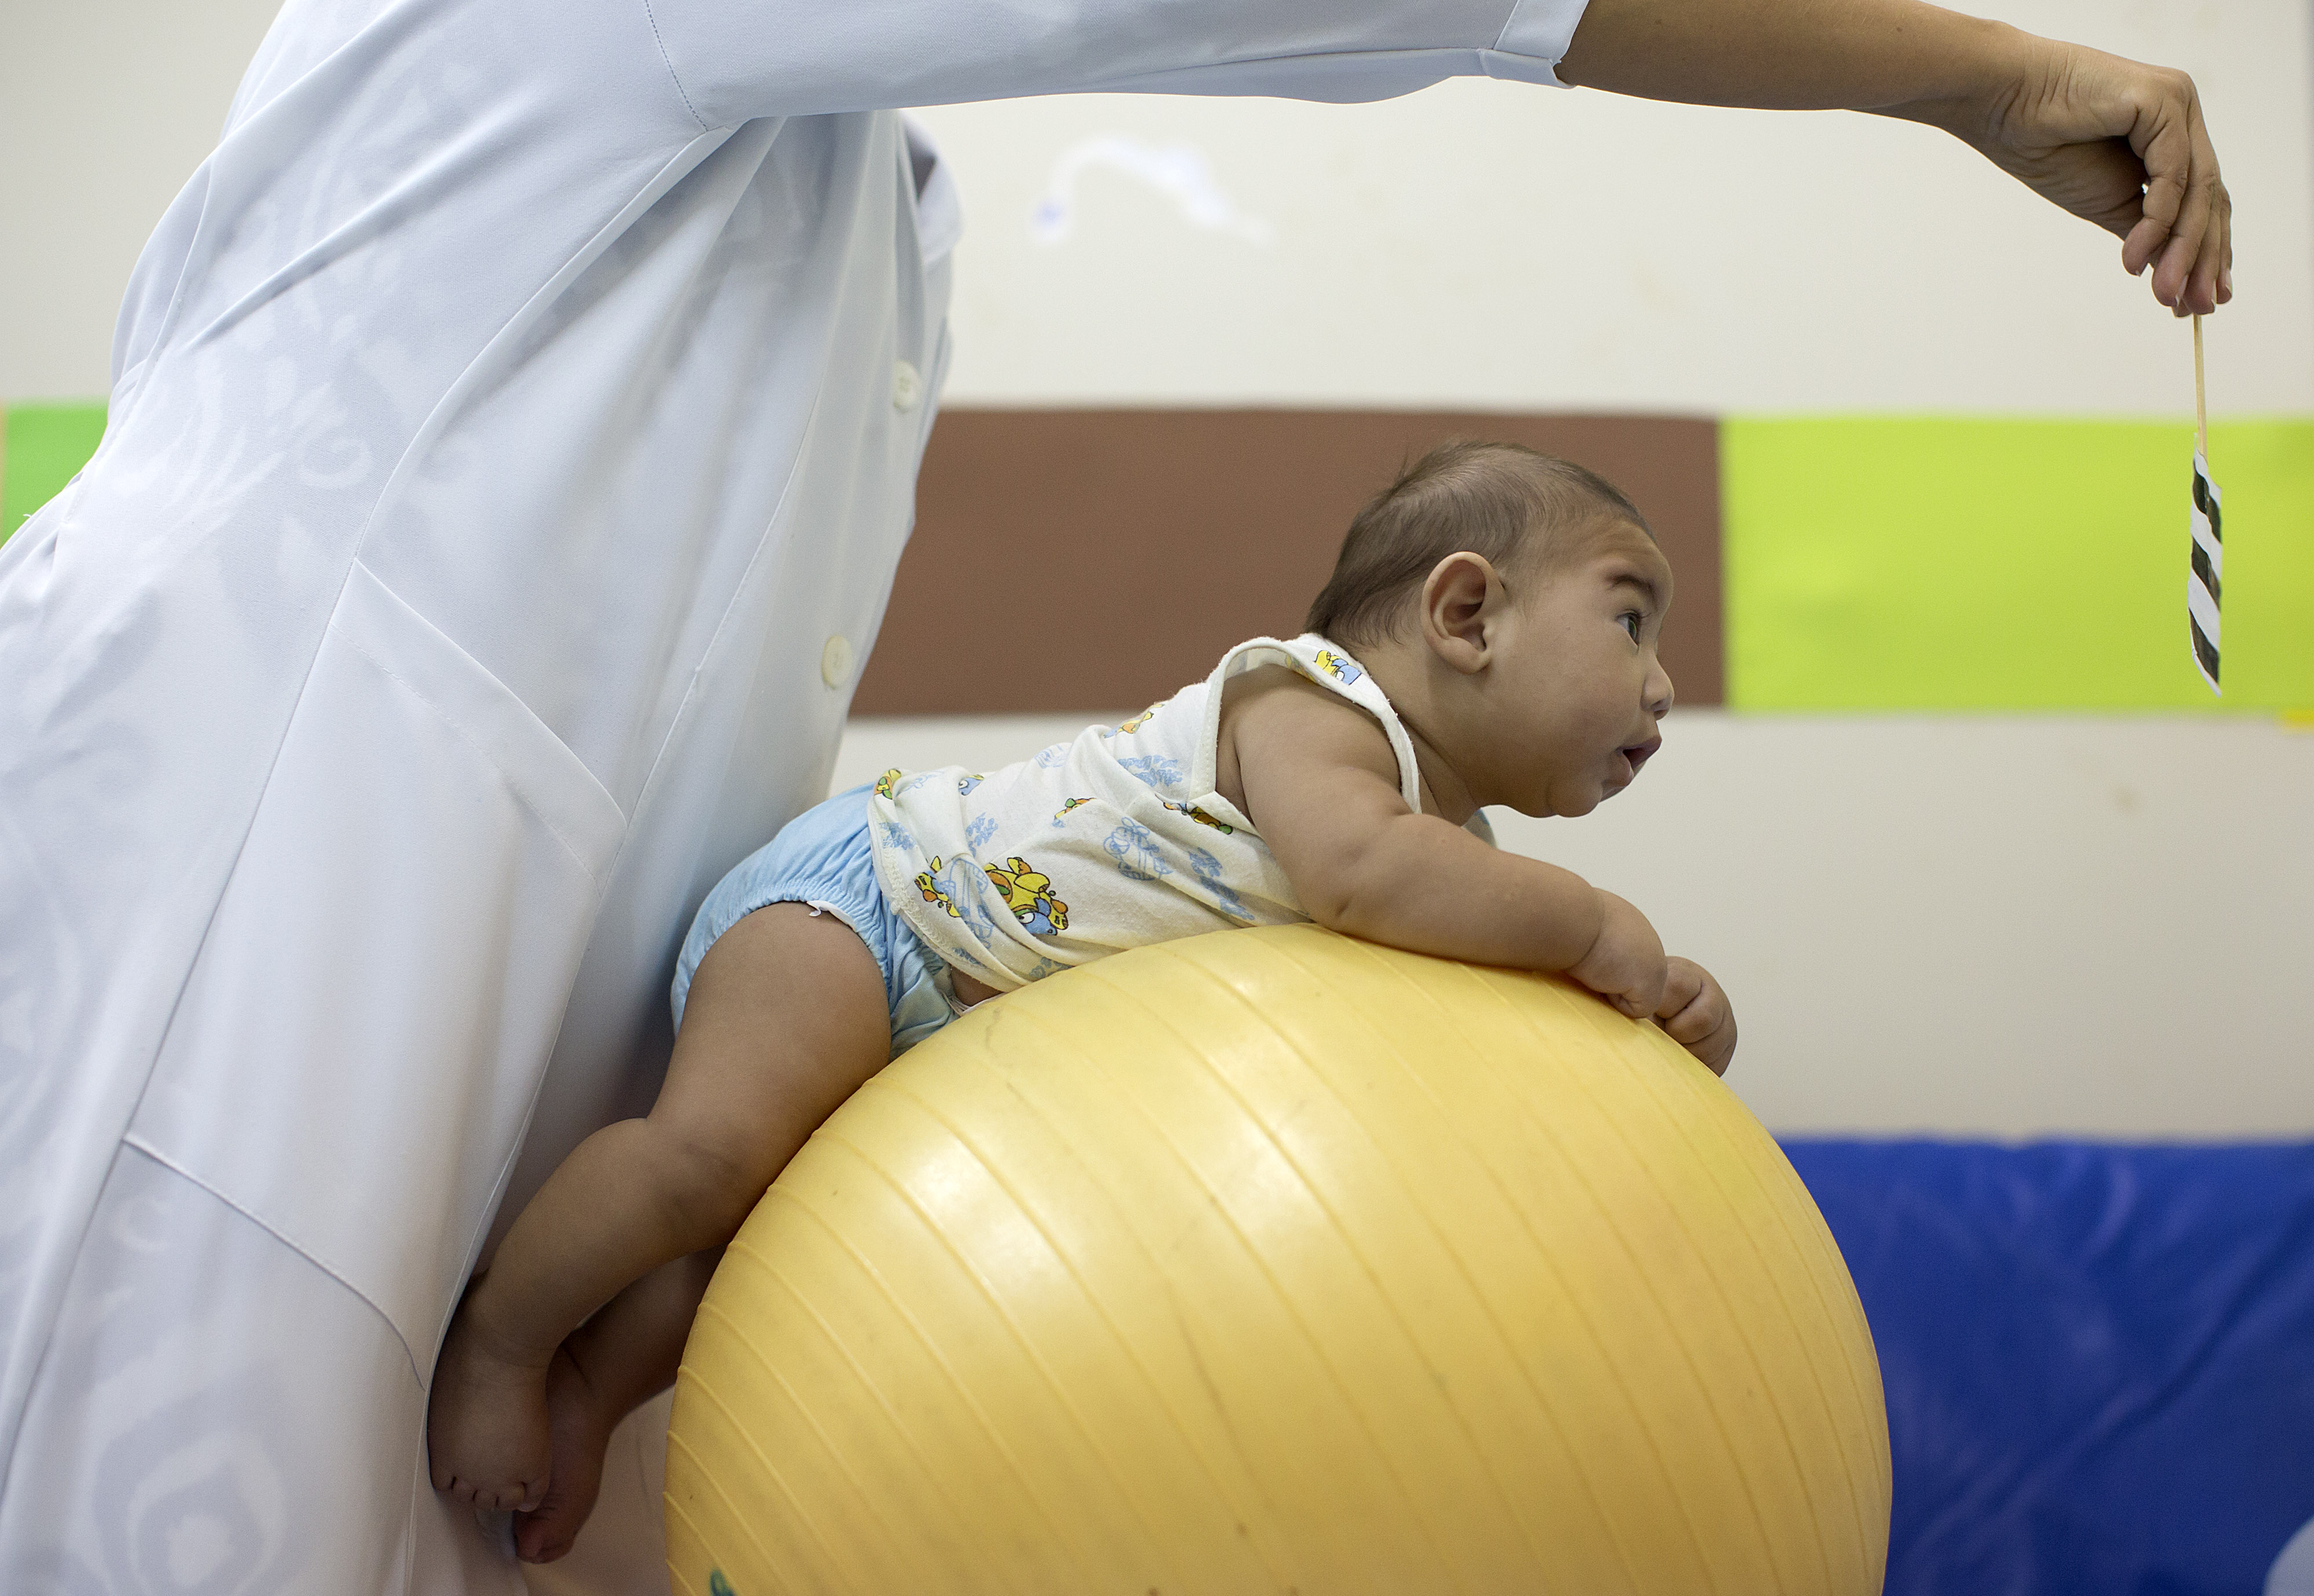 An infant who was born with microcephaly undergoes physical therapy at a therapy treatment centre in Joao Pessoa, Brazil. Photo: AP